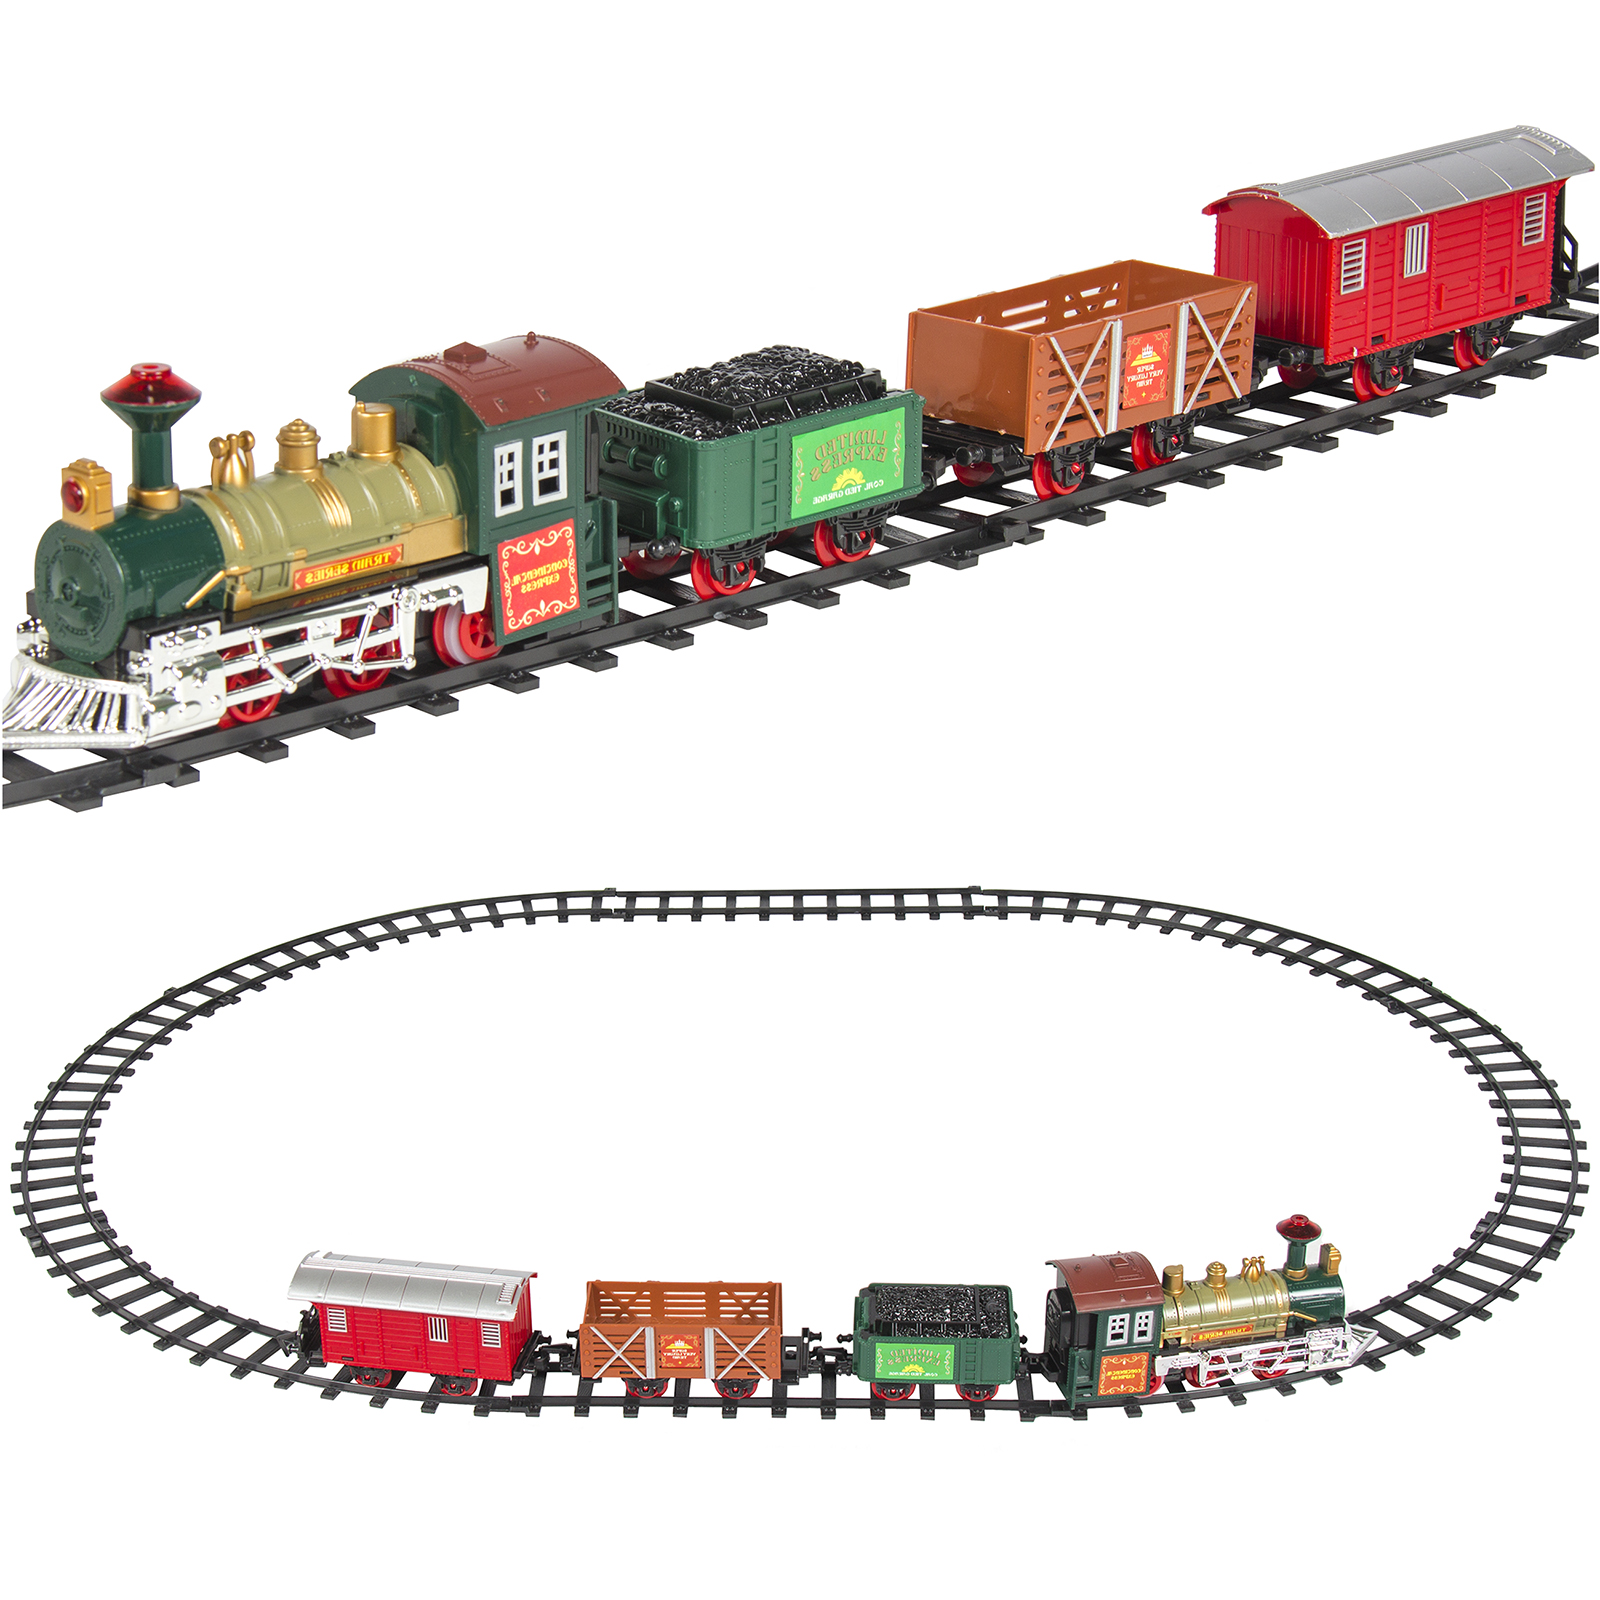 Best Choice Products Kids Classic Electric Railway Train Car Track Play Set Toy w/ Music, Lights - image 1 of 5